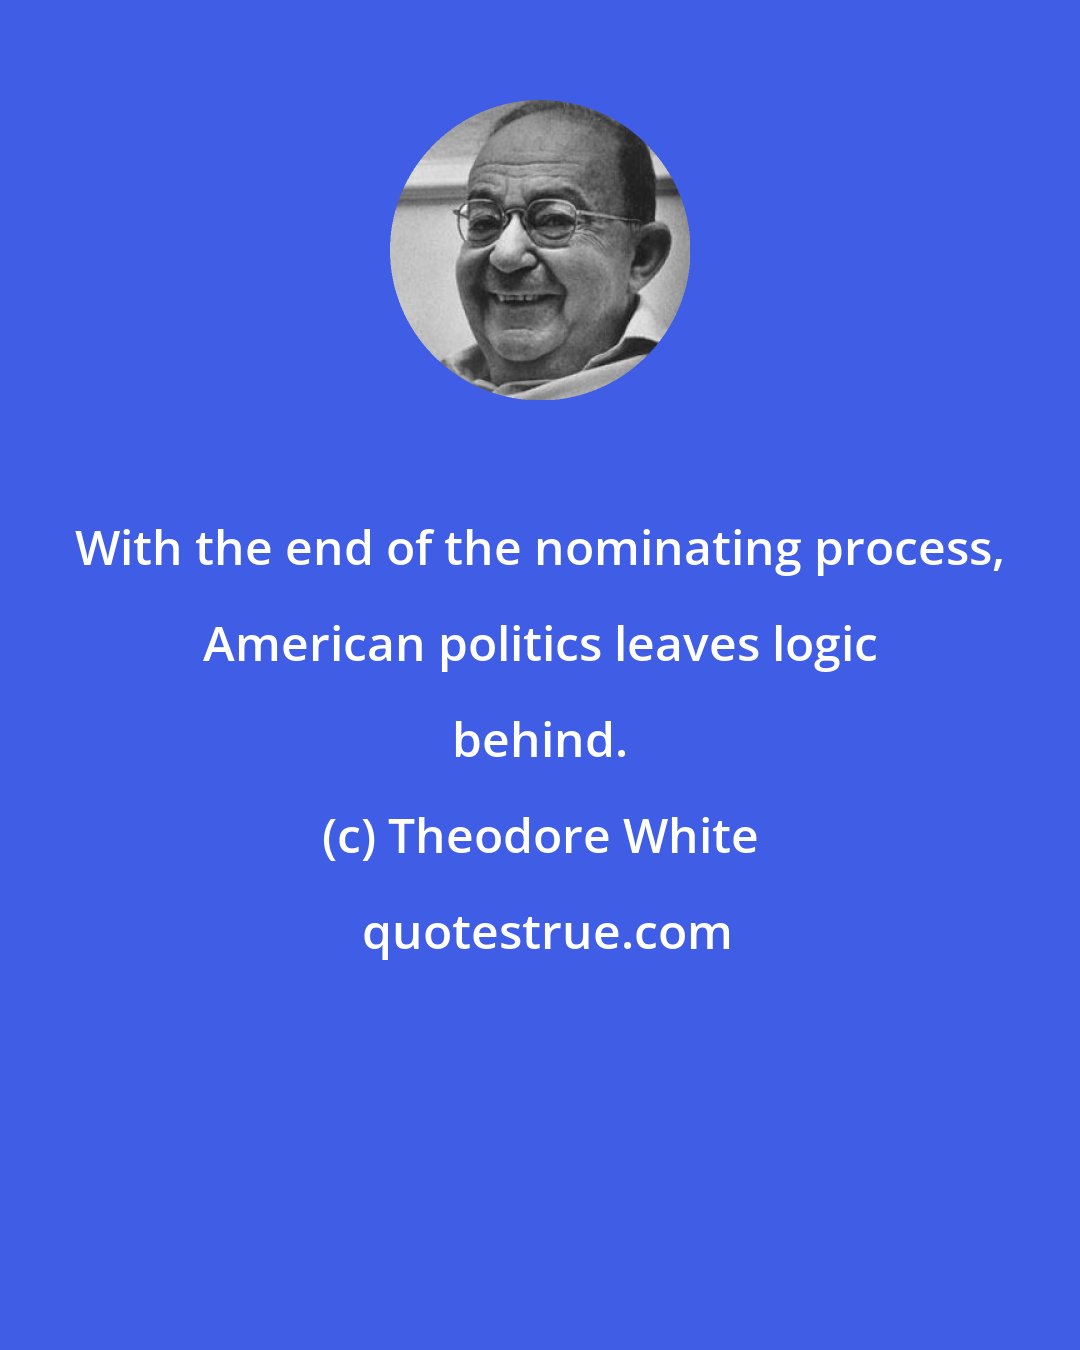 Theodore White: With the end of the nominating process, American politics leaves logic behind.